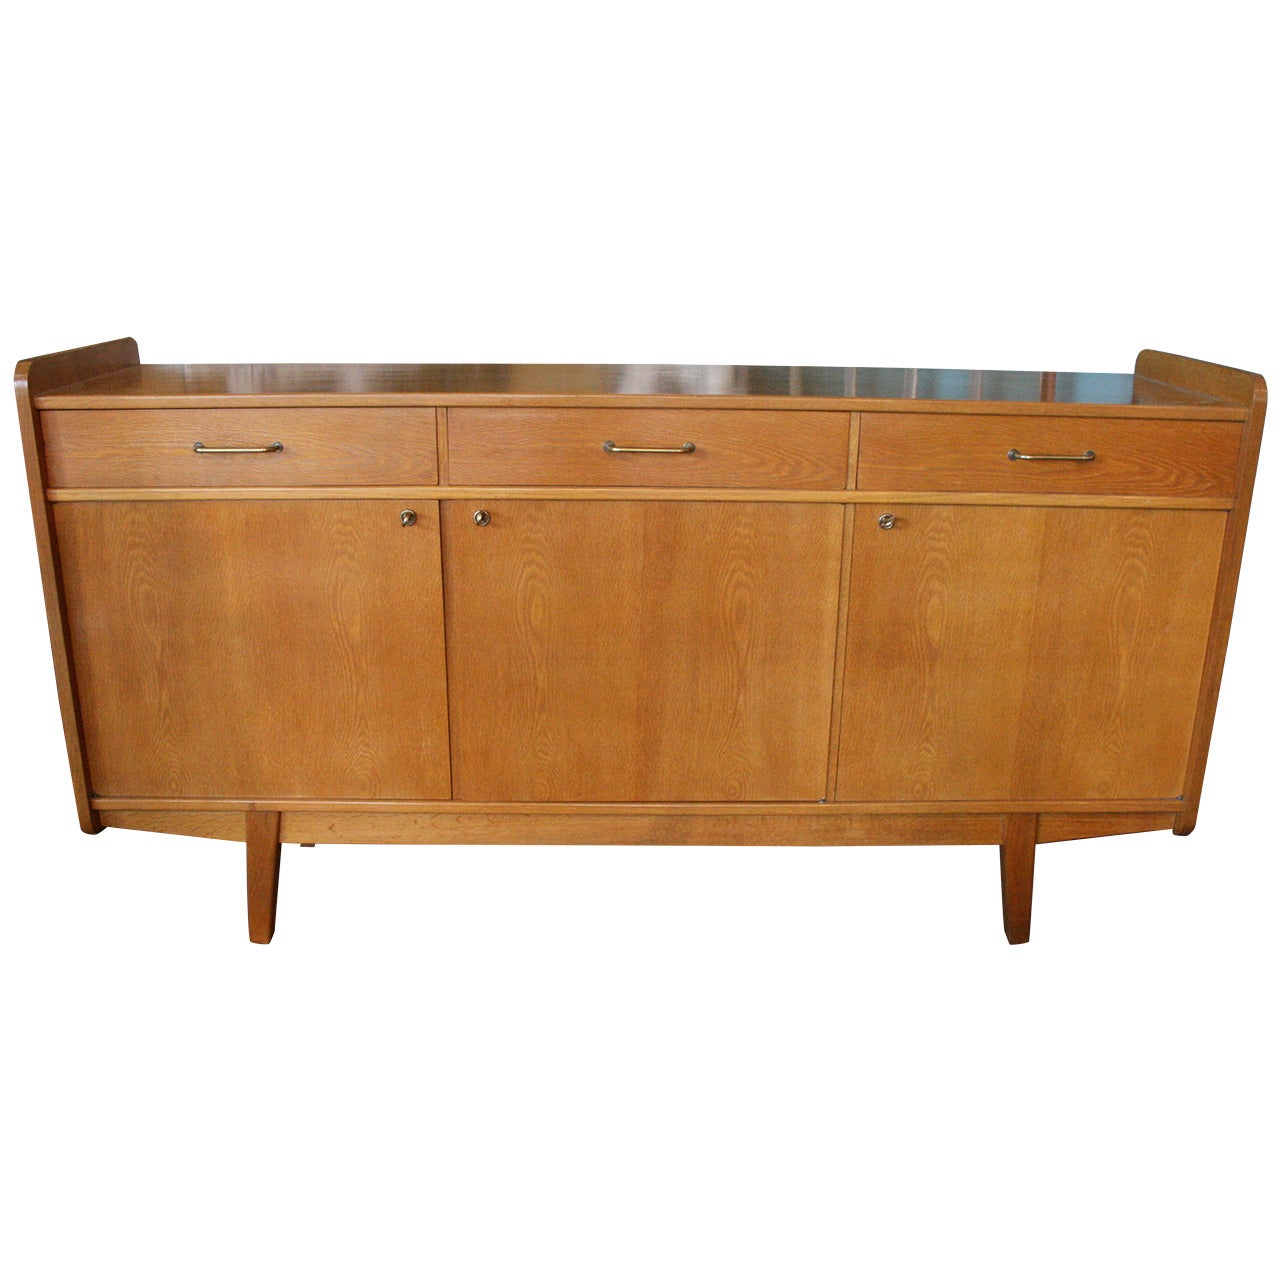 French Modern Sideboard by René-Jean Caillette